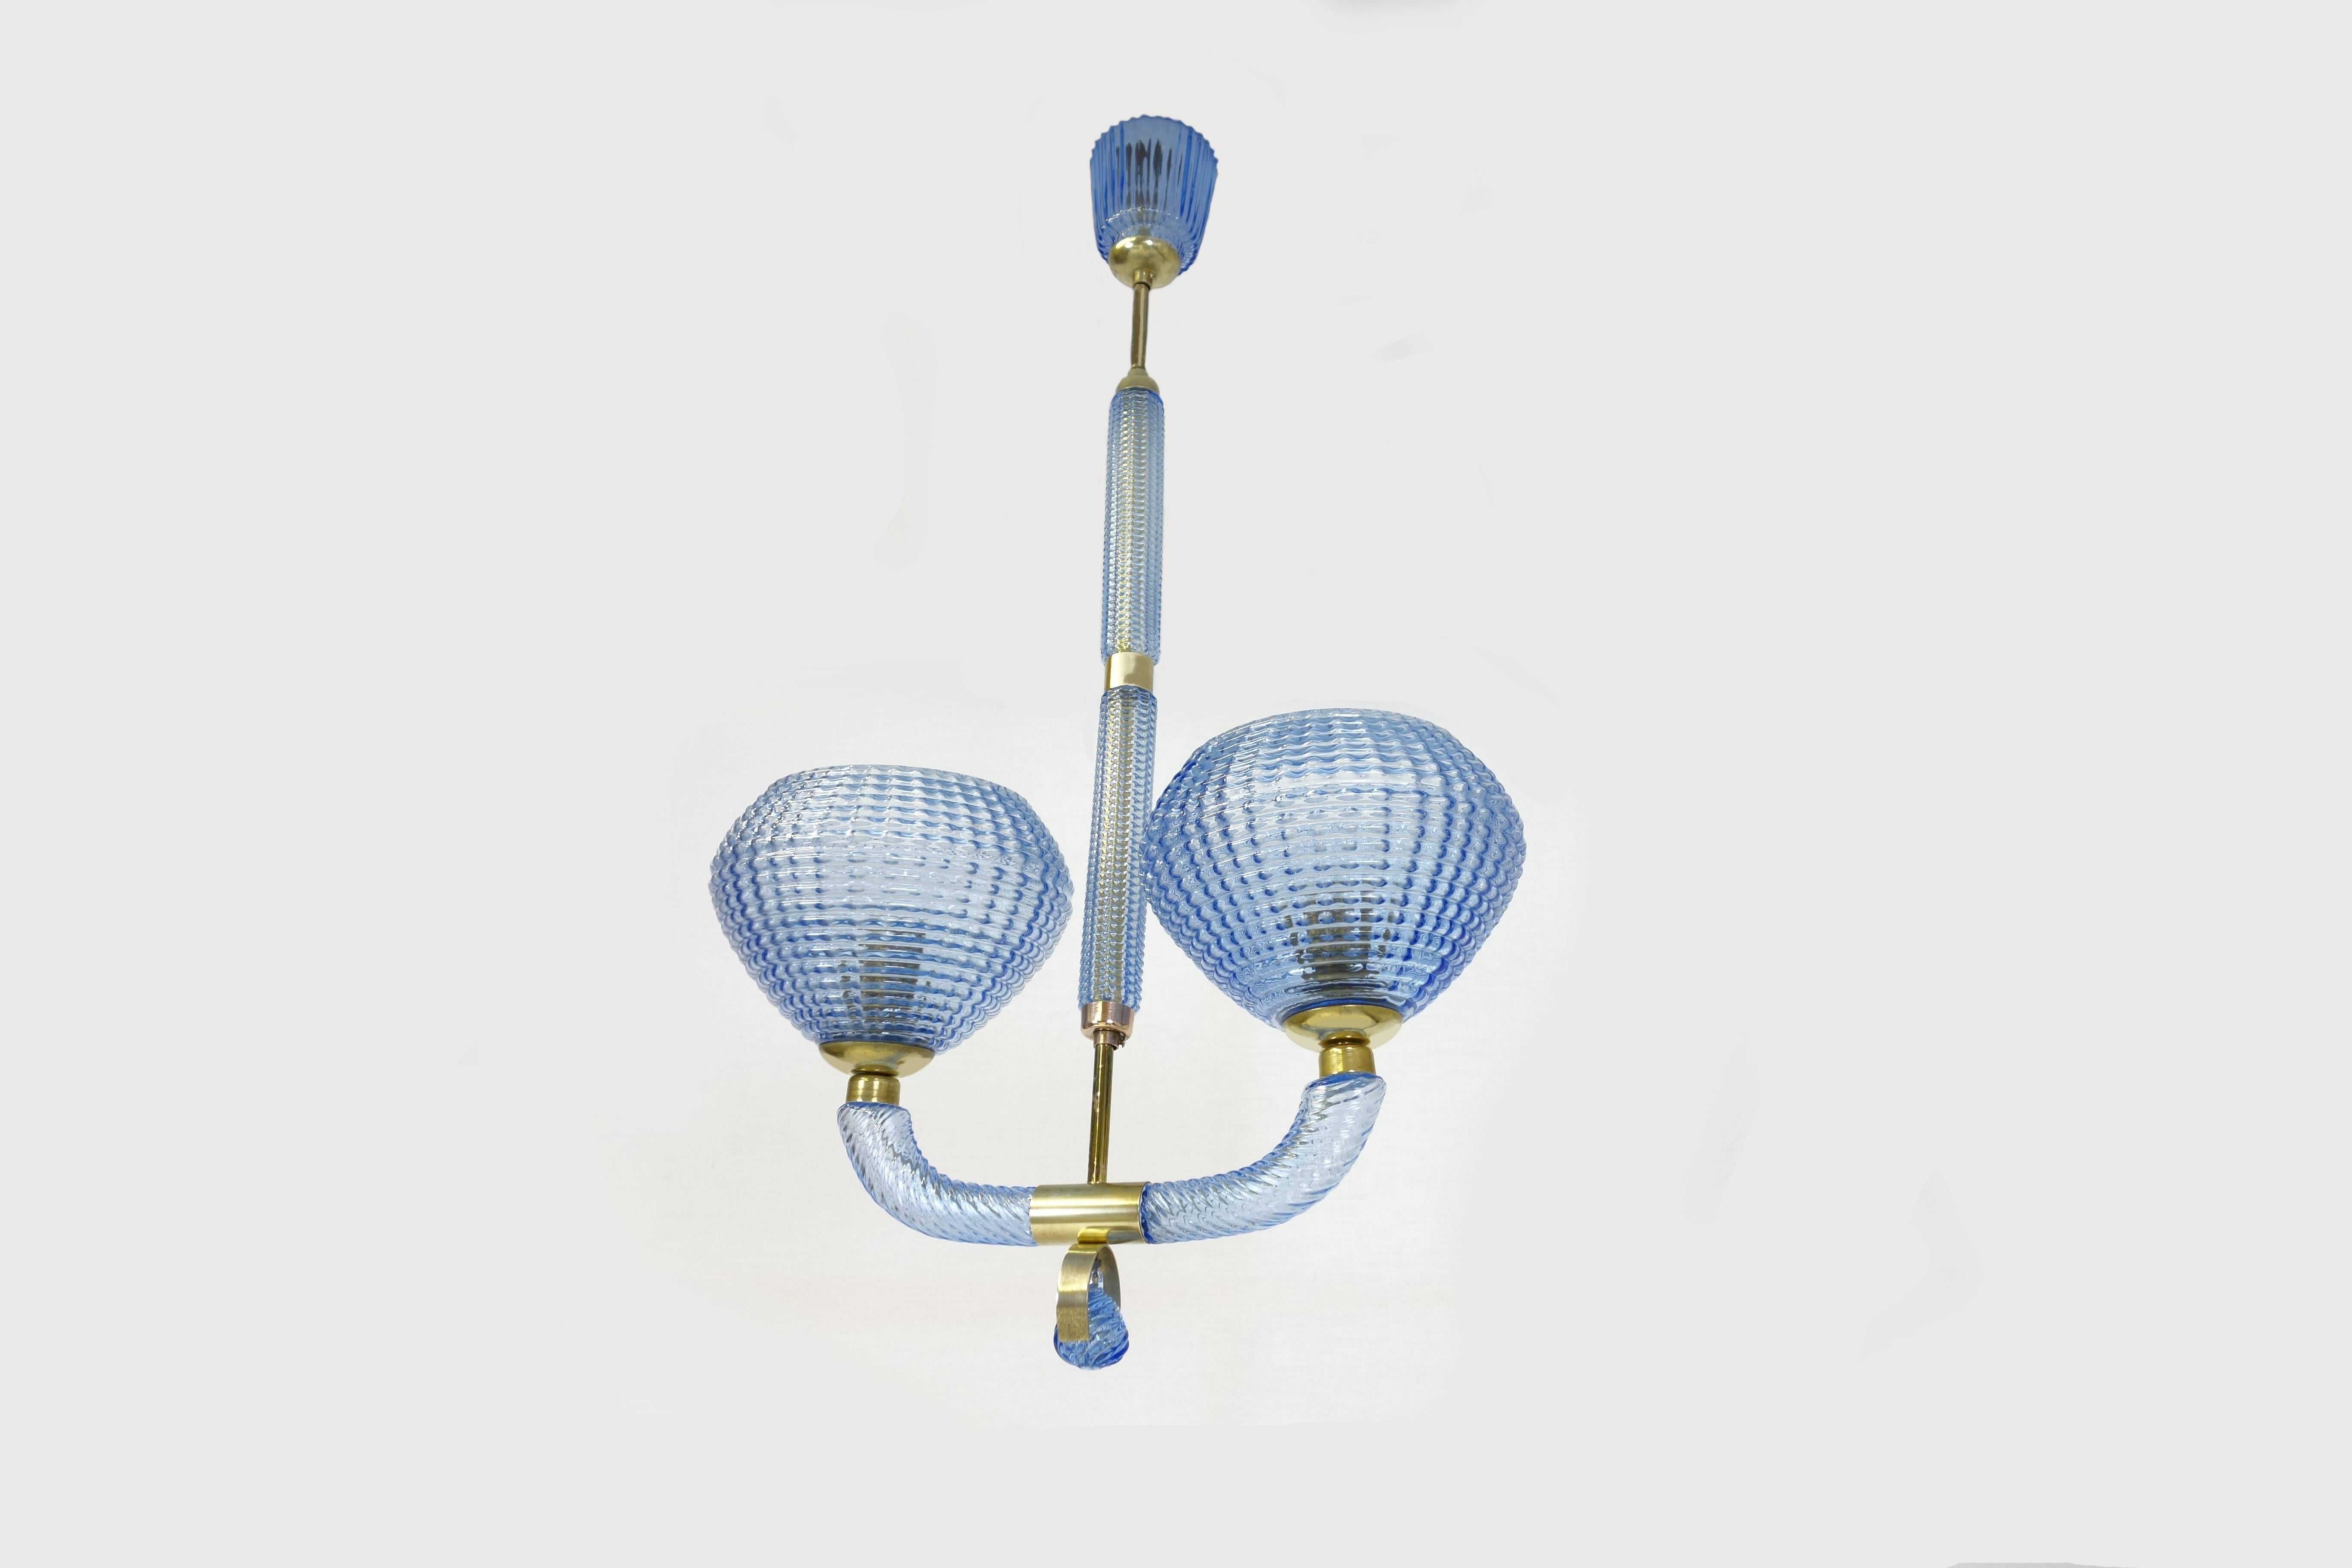 Amazing blue pendant lamp with glass branches, two glass cups and beautiful details by Barovier and Toso. The tasteful accentuation and detailing of the used brass elements enhances the richness and effectiveness of its expression.